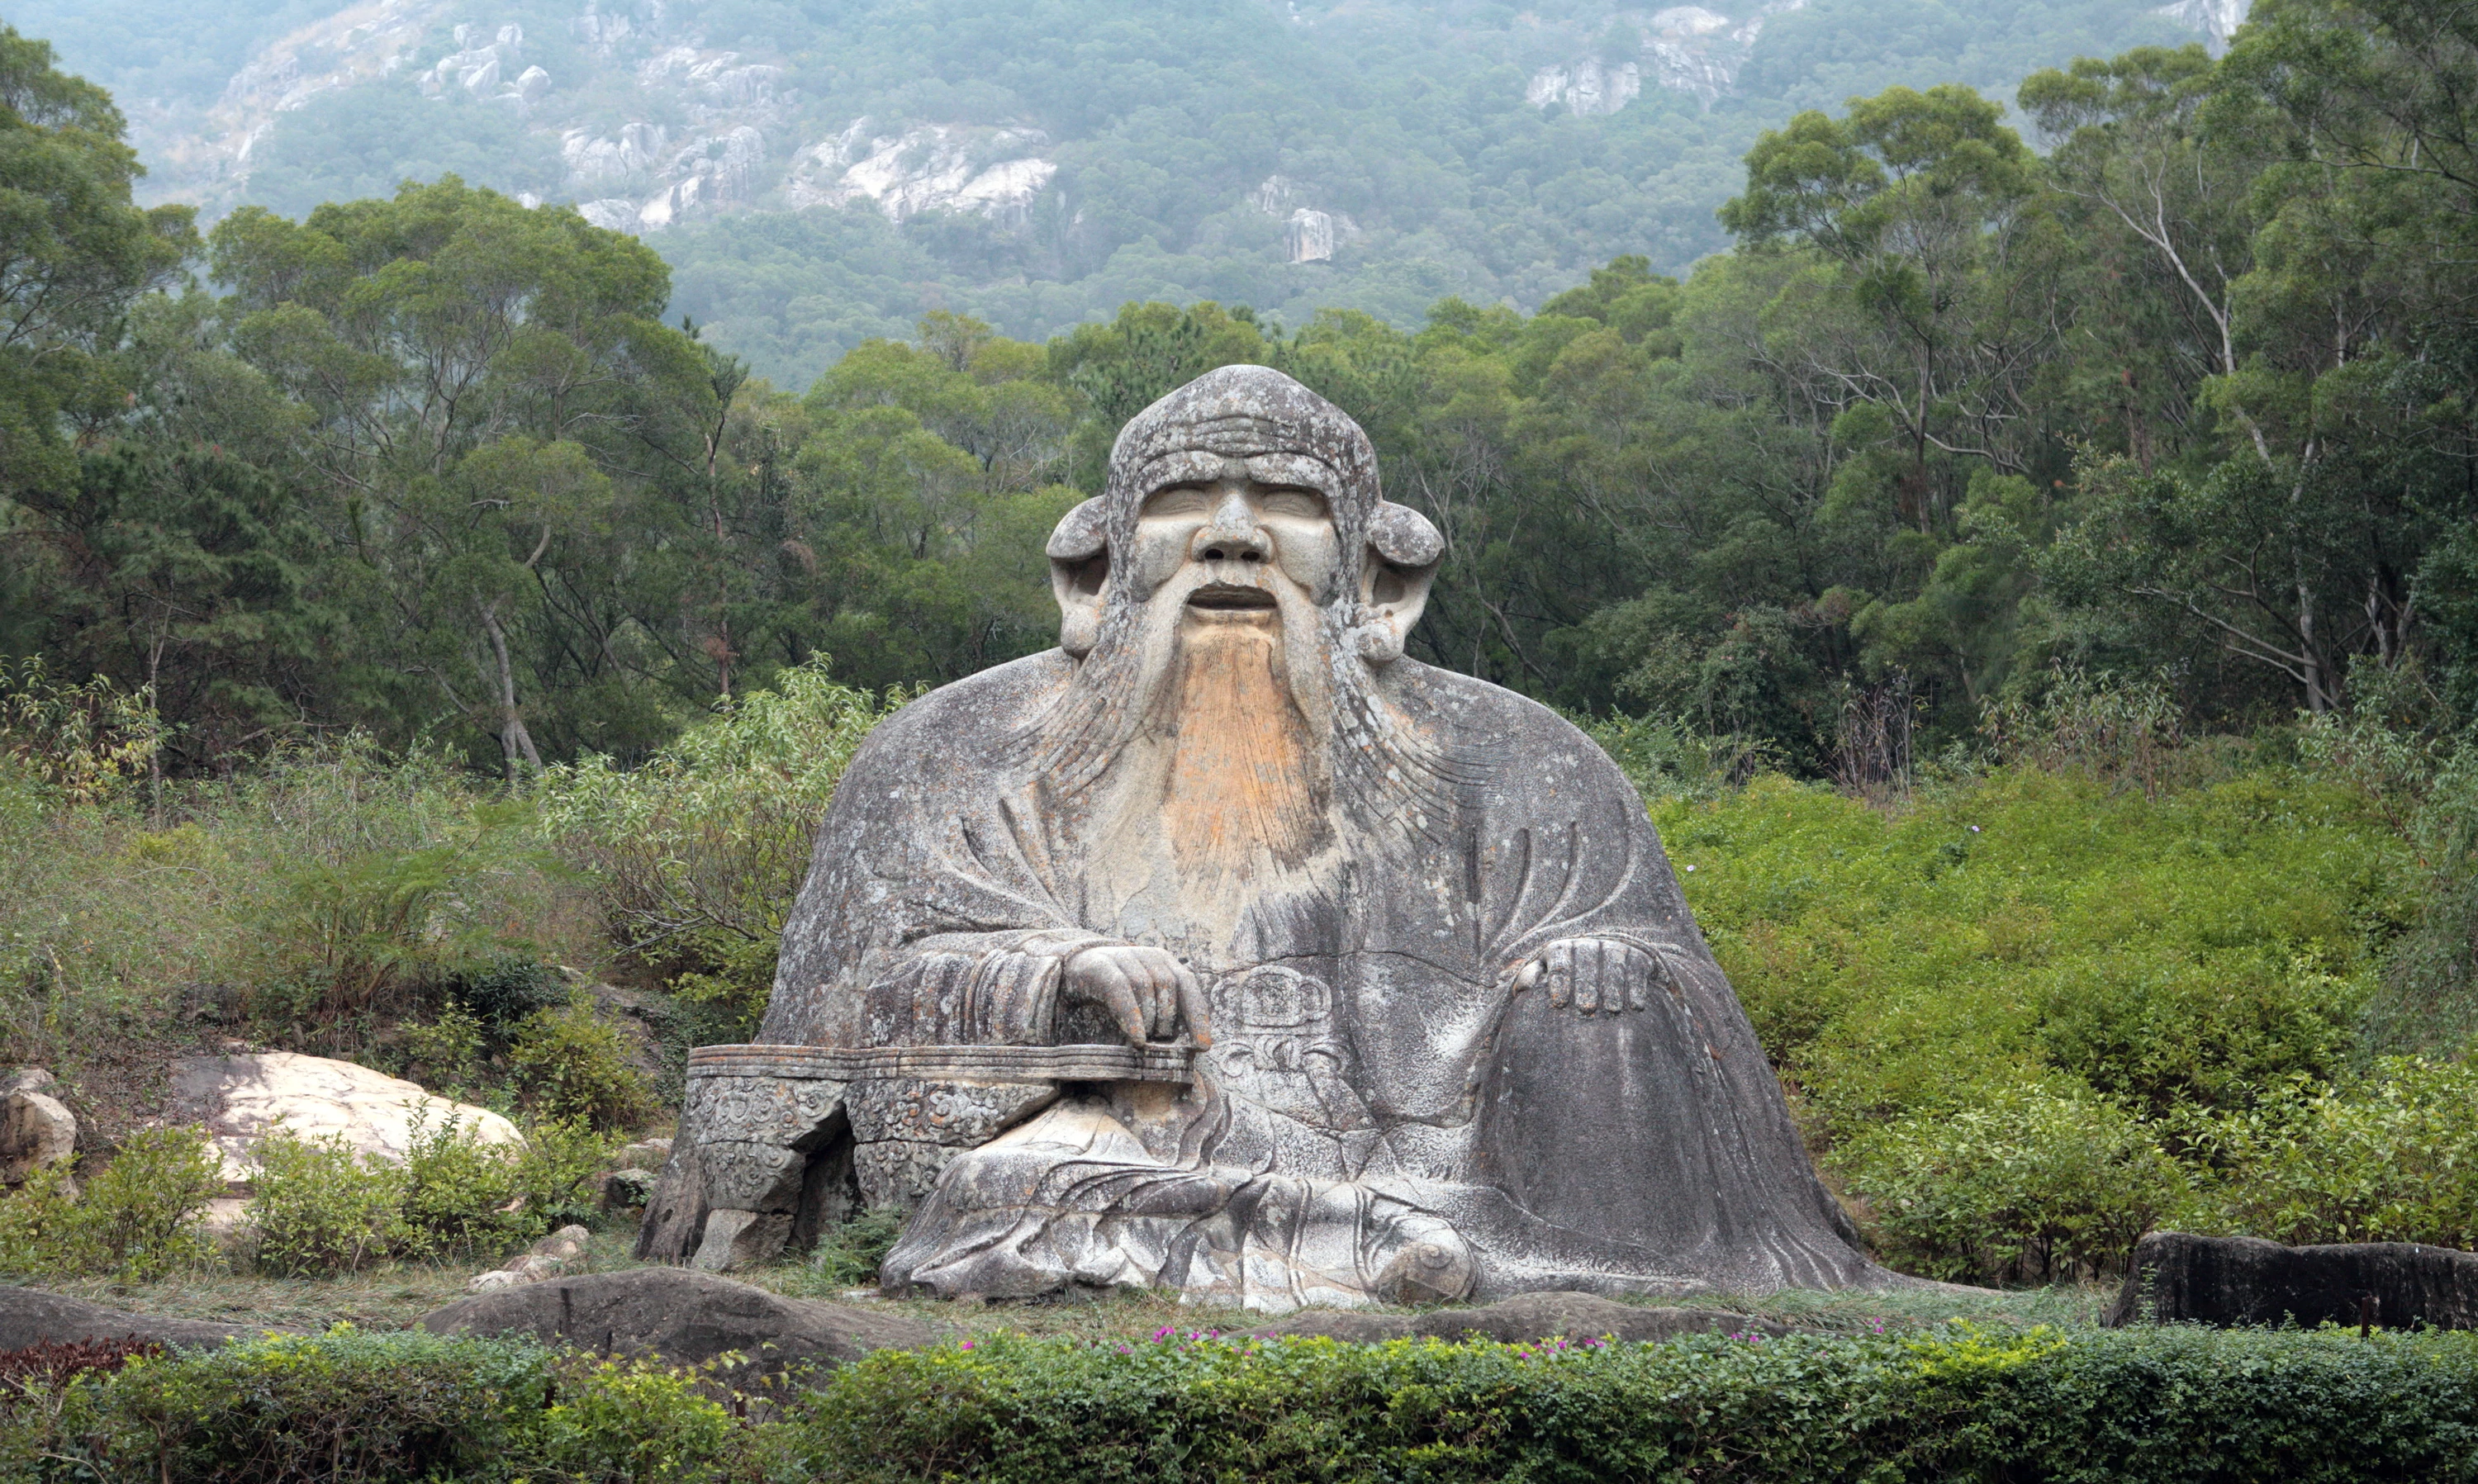 Statue of Laozi 老君岩, Song Dynasty